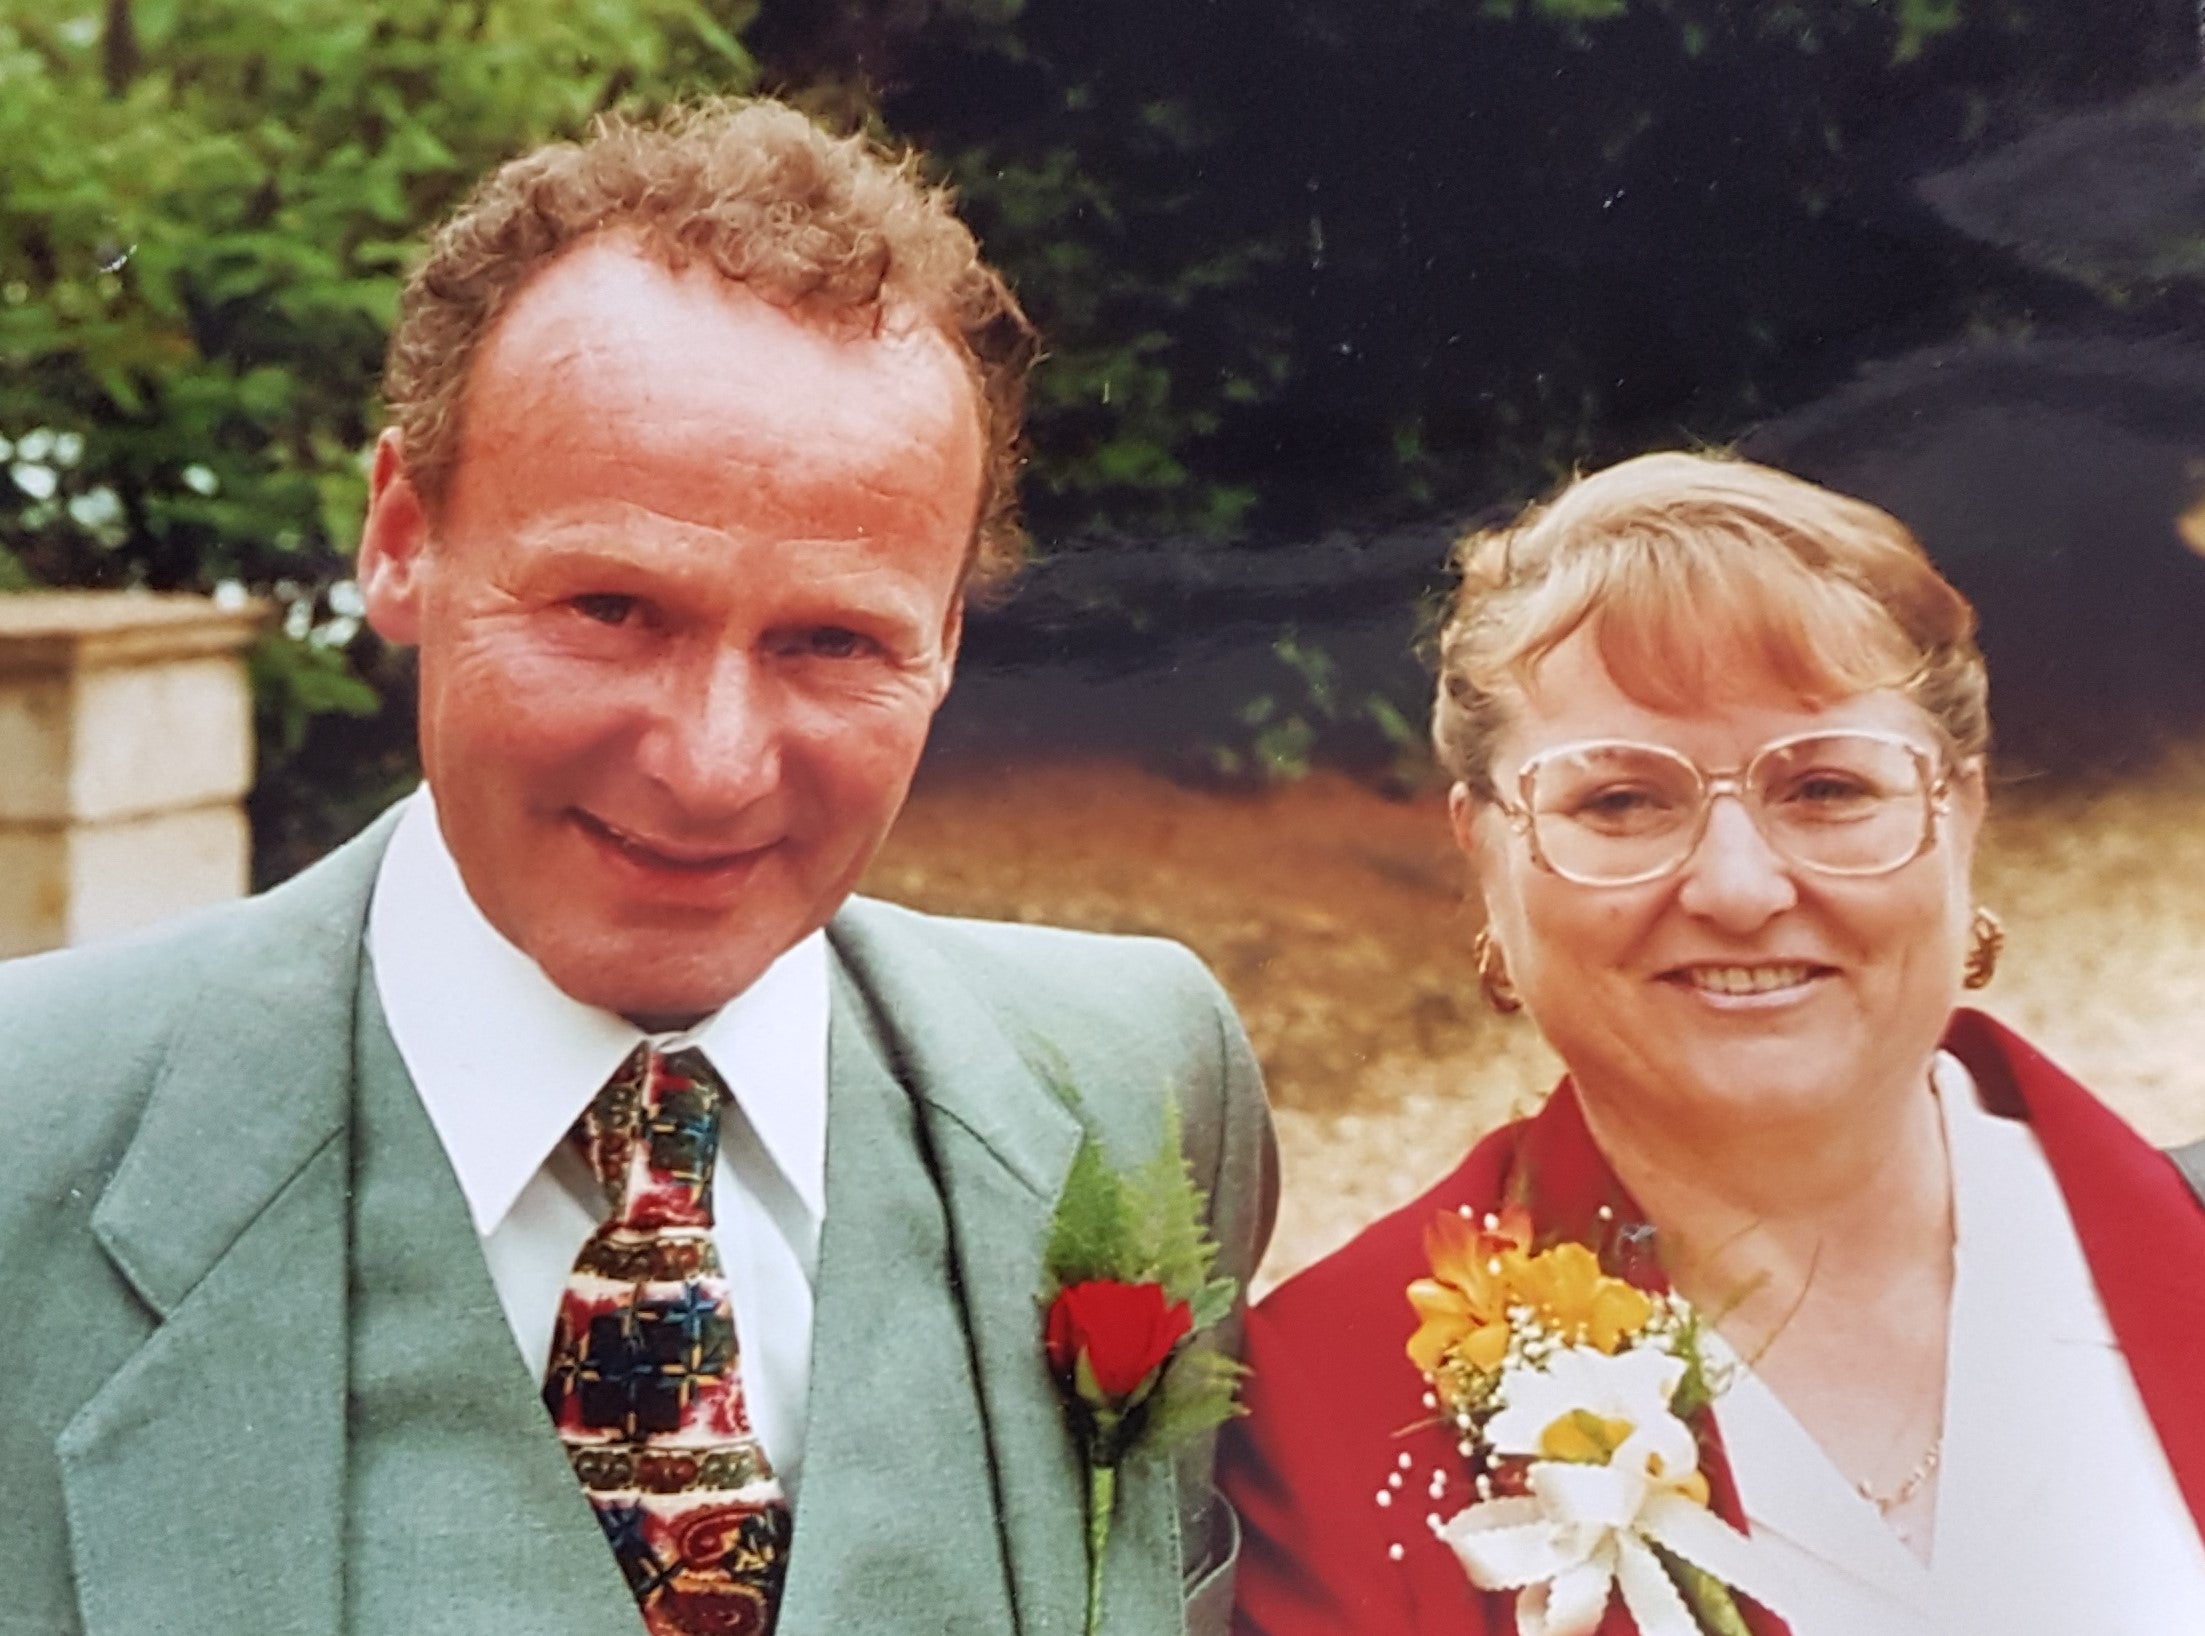 Philip and his wife, Gina, who is now 73